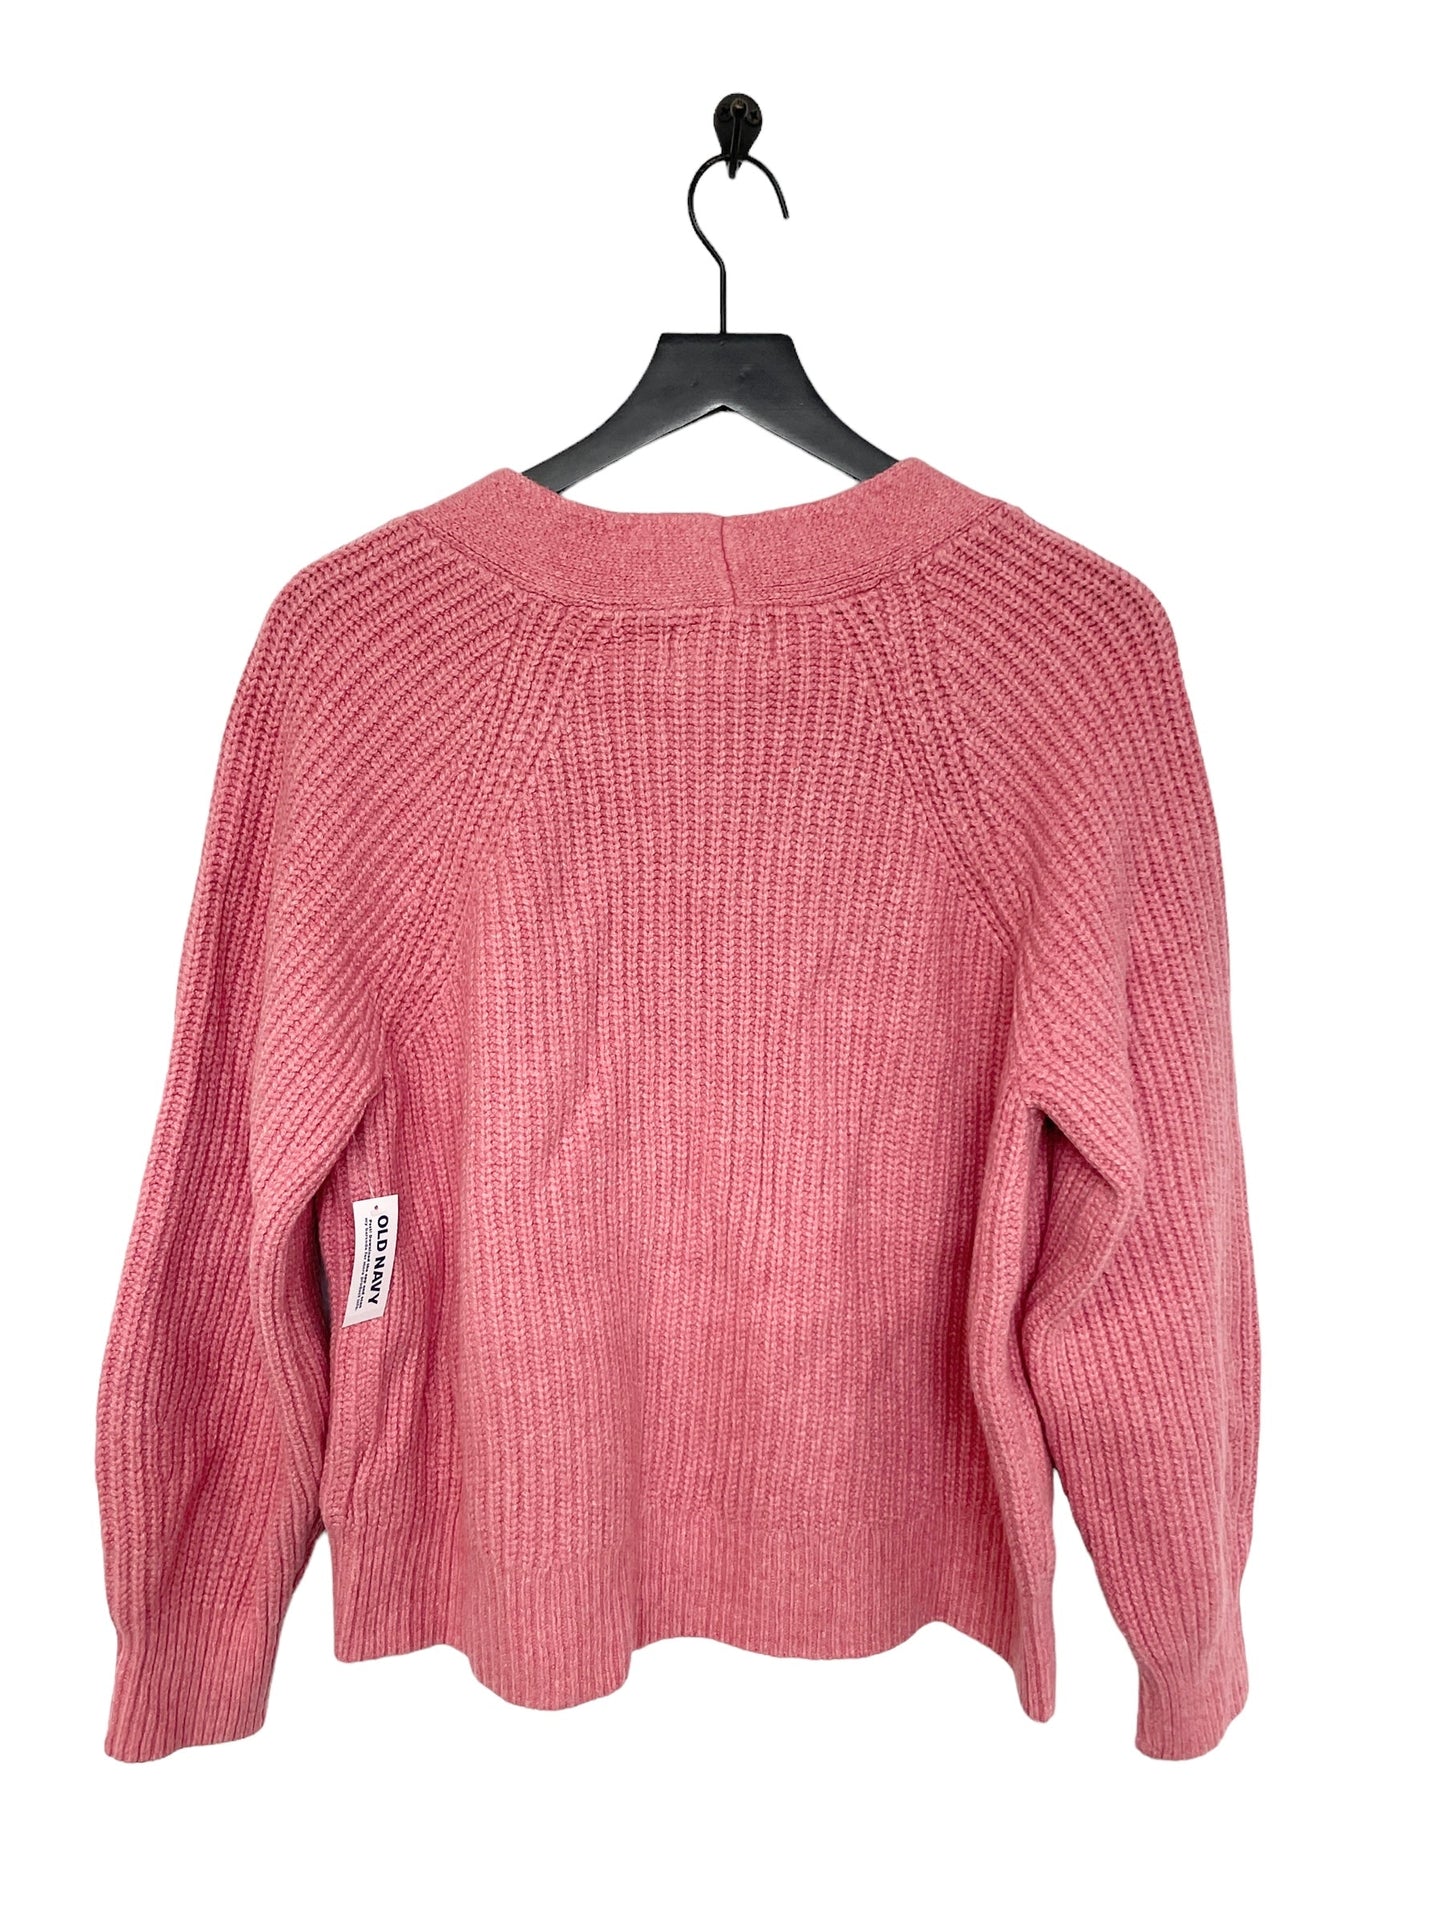 Pink Sweater Cardigan Old Navy, Size L